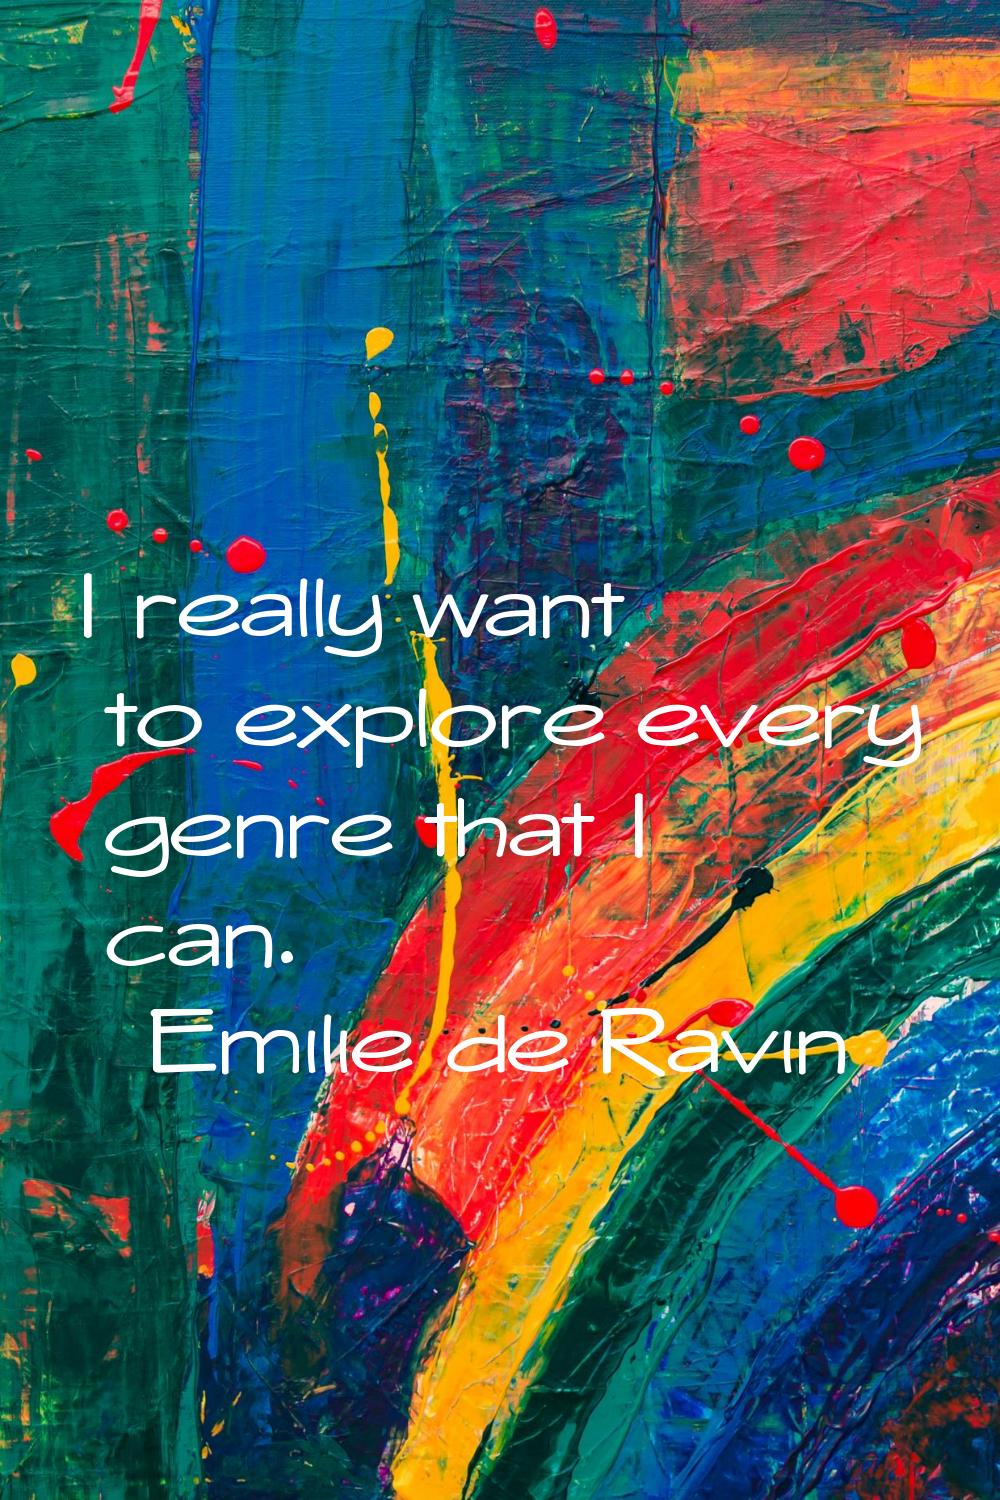 I really want to explore every genre that I can.